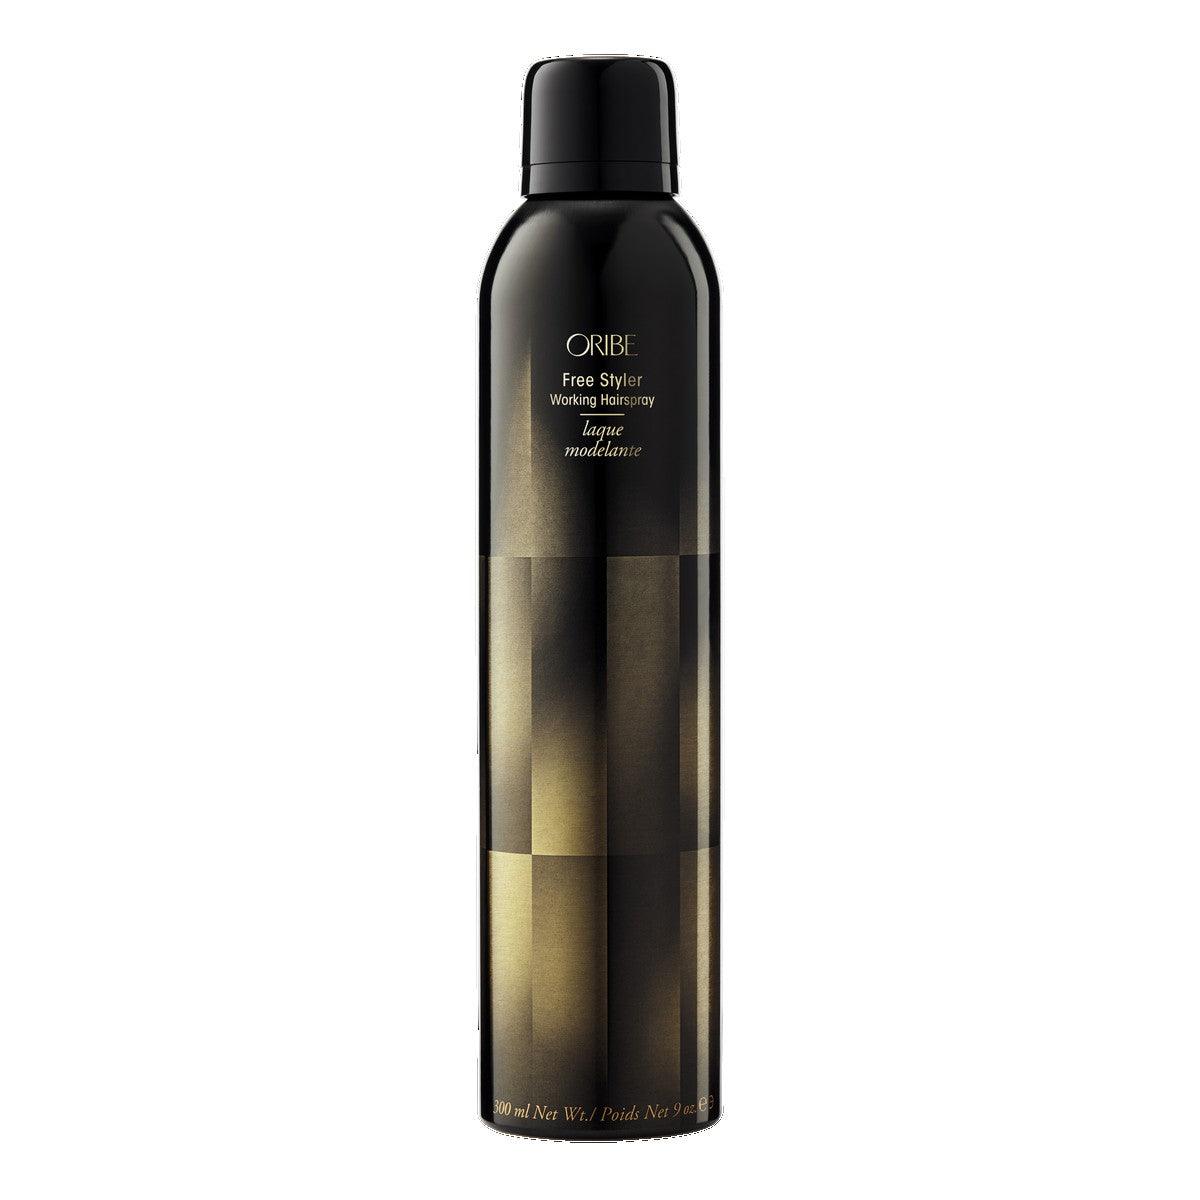 FREE STYLER WORKING HAIRSPRAY Oribe Boutique Deauville